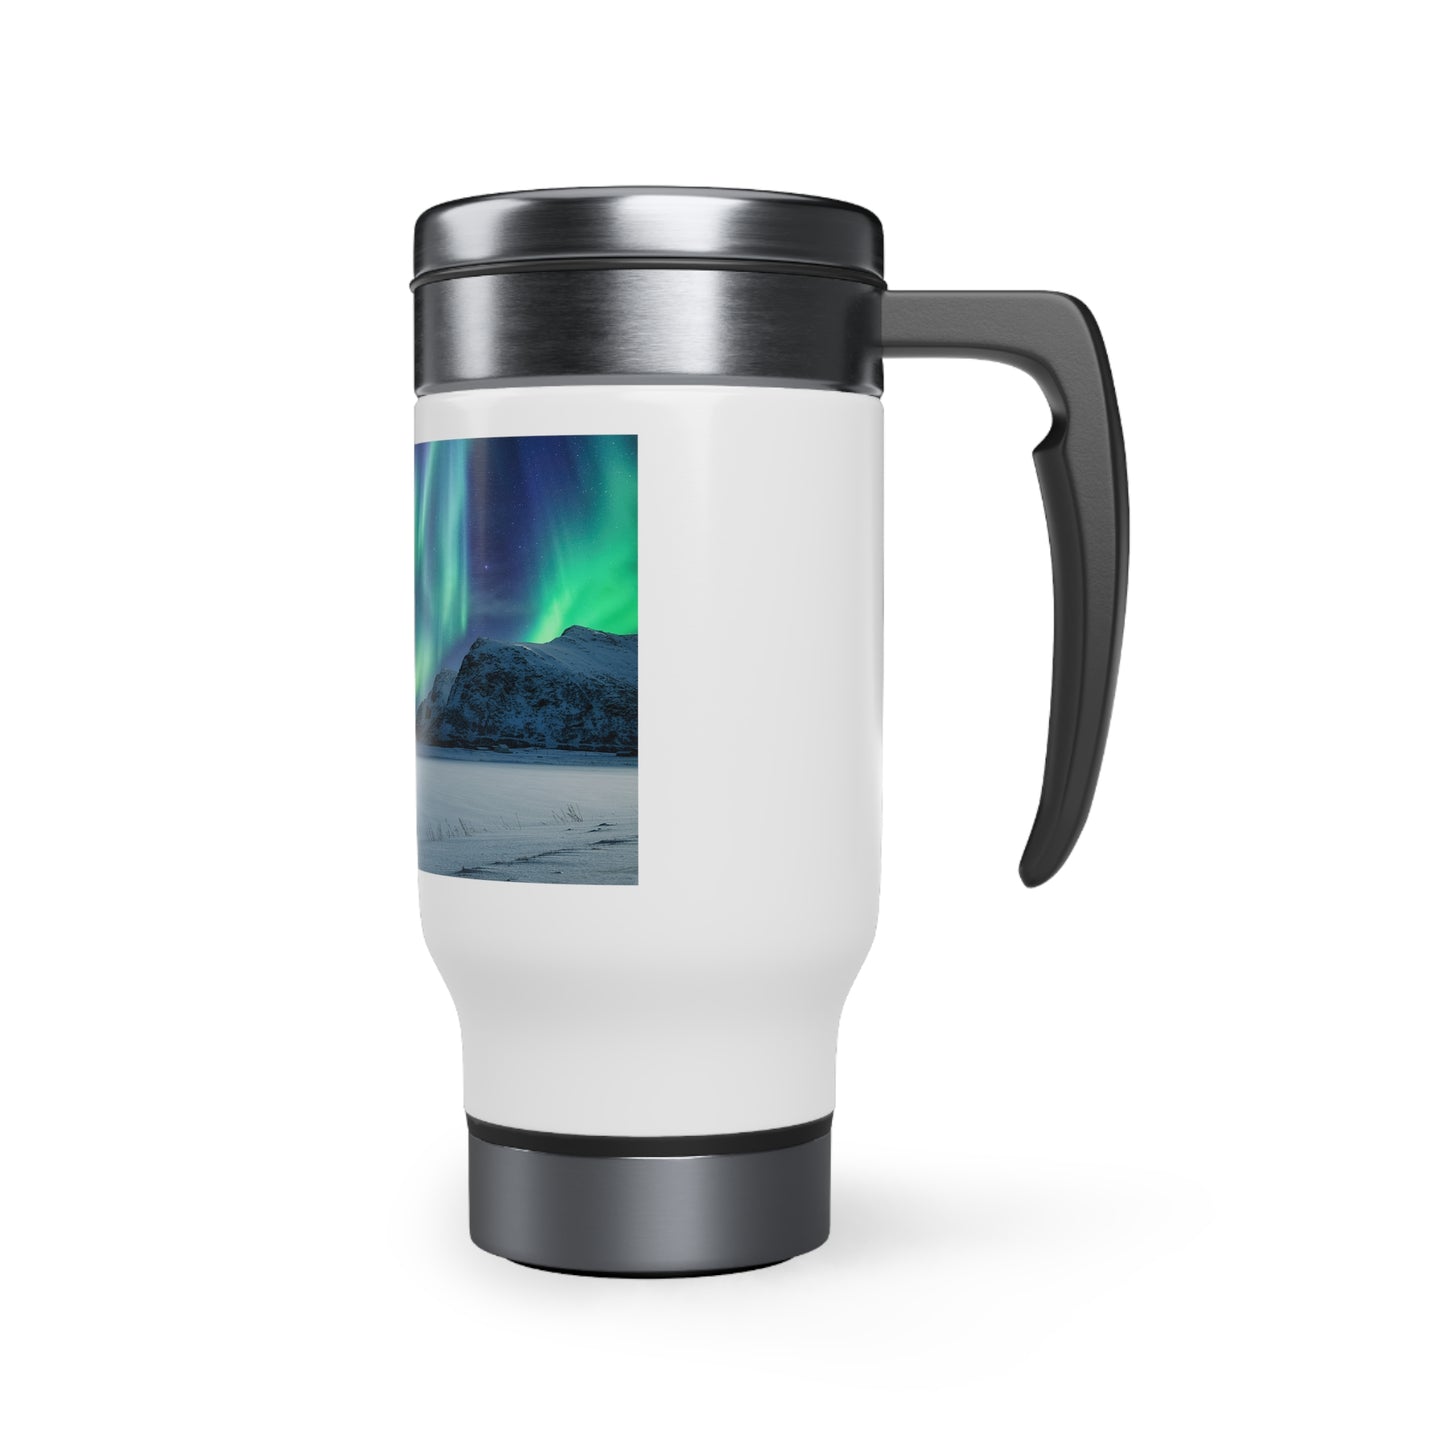 Unique Aurora Borealis Travel Mug with Handle 14oz  - Northern Light Travel Accessories - Stainless Steel Mugs - Perfect Aurora Lovers Gift 13